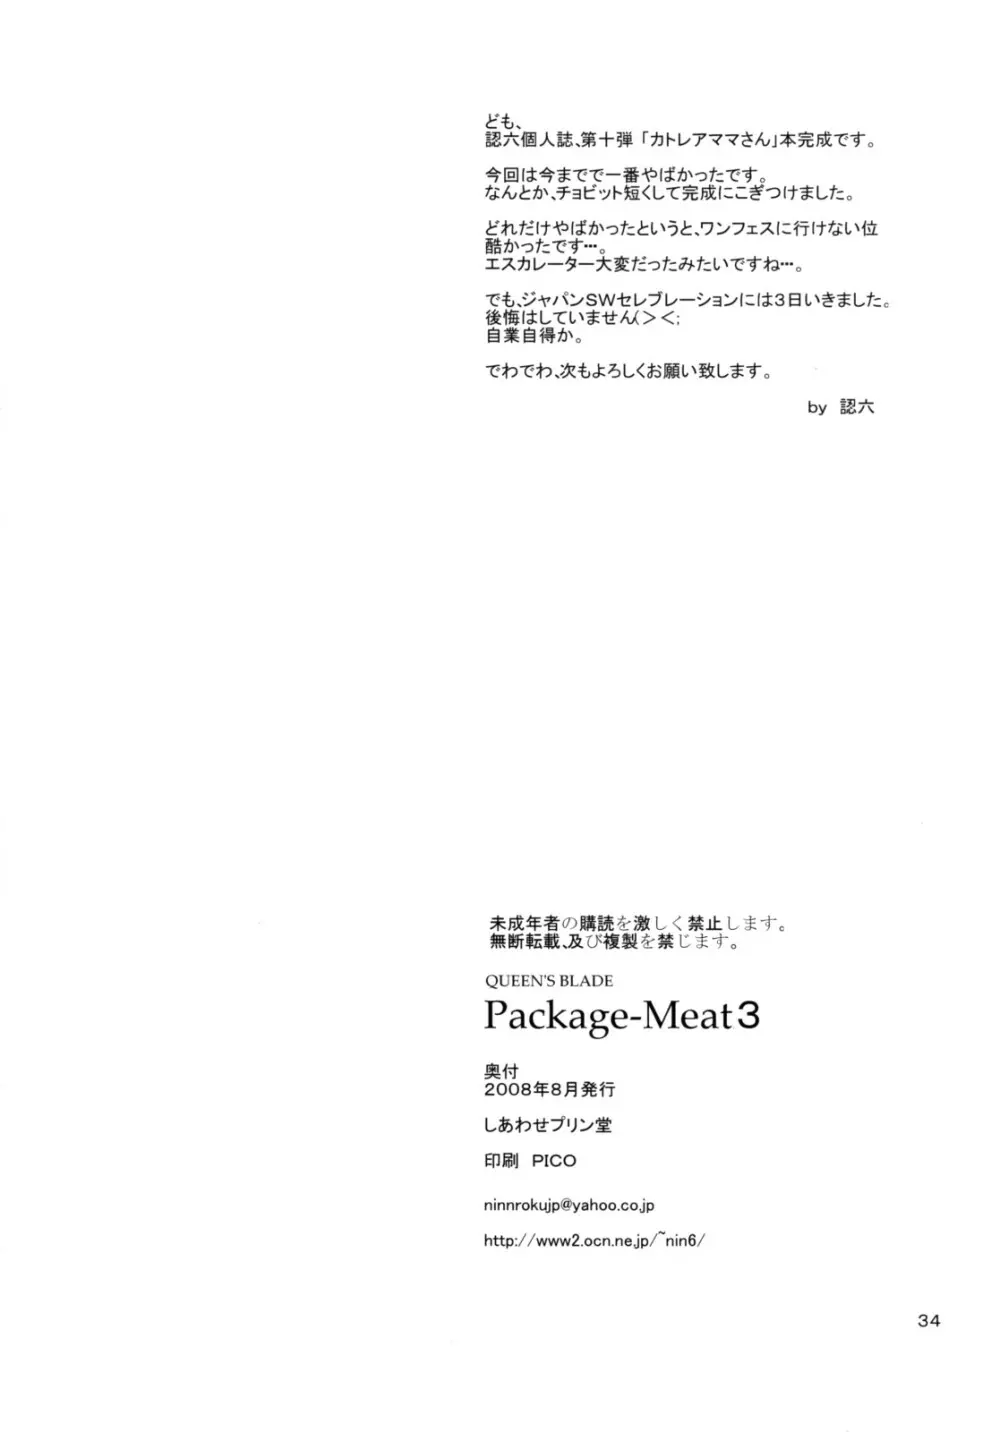 Package Meat 3 33ページ